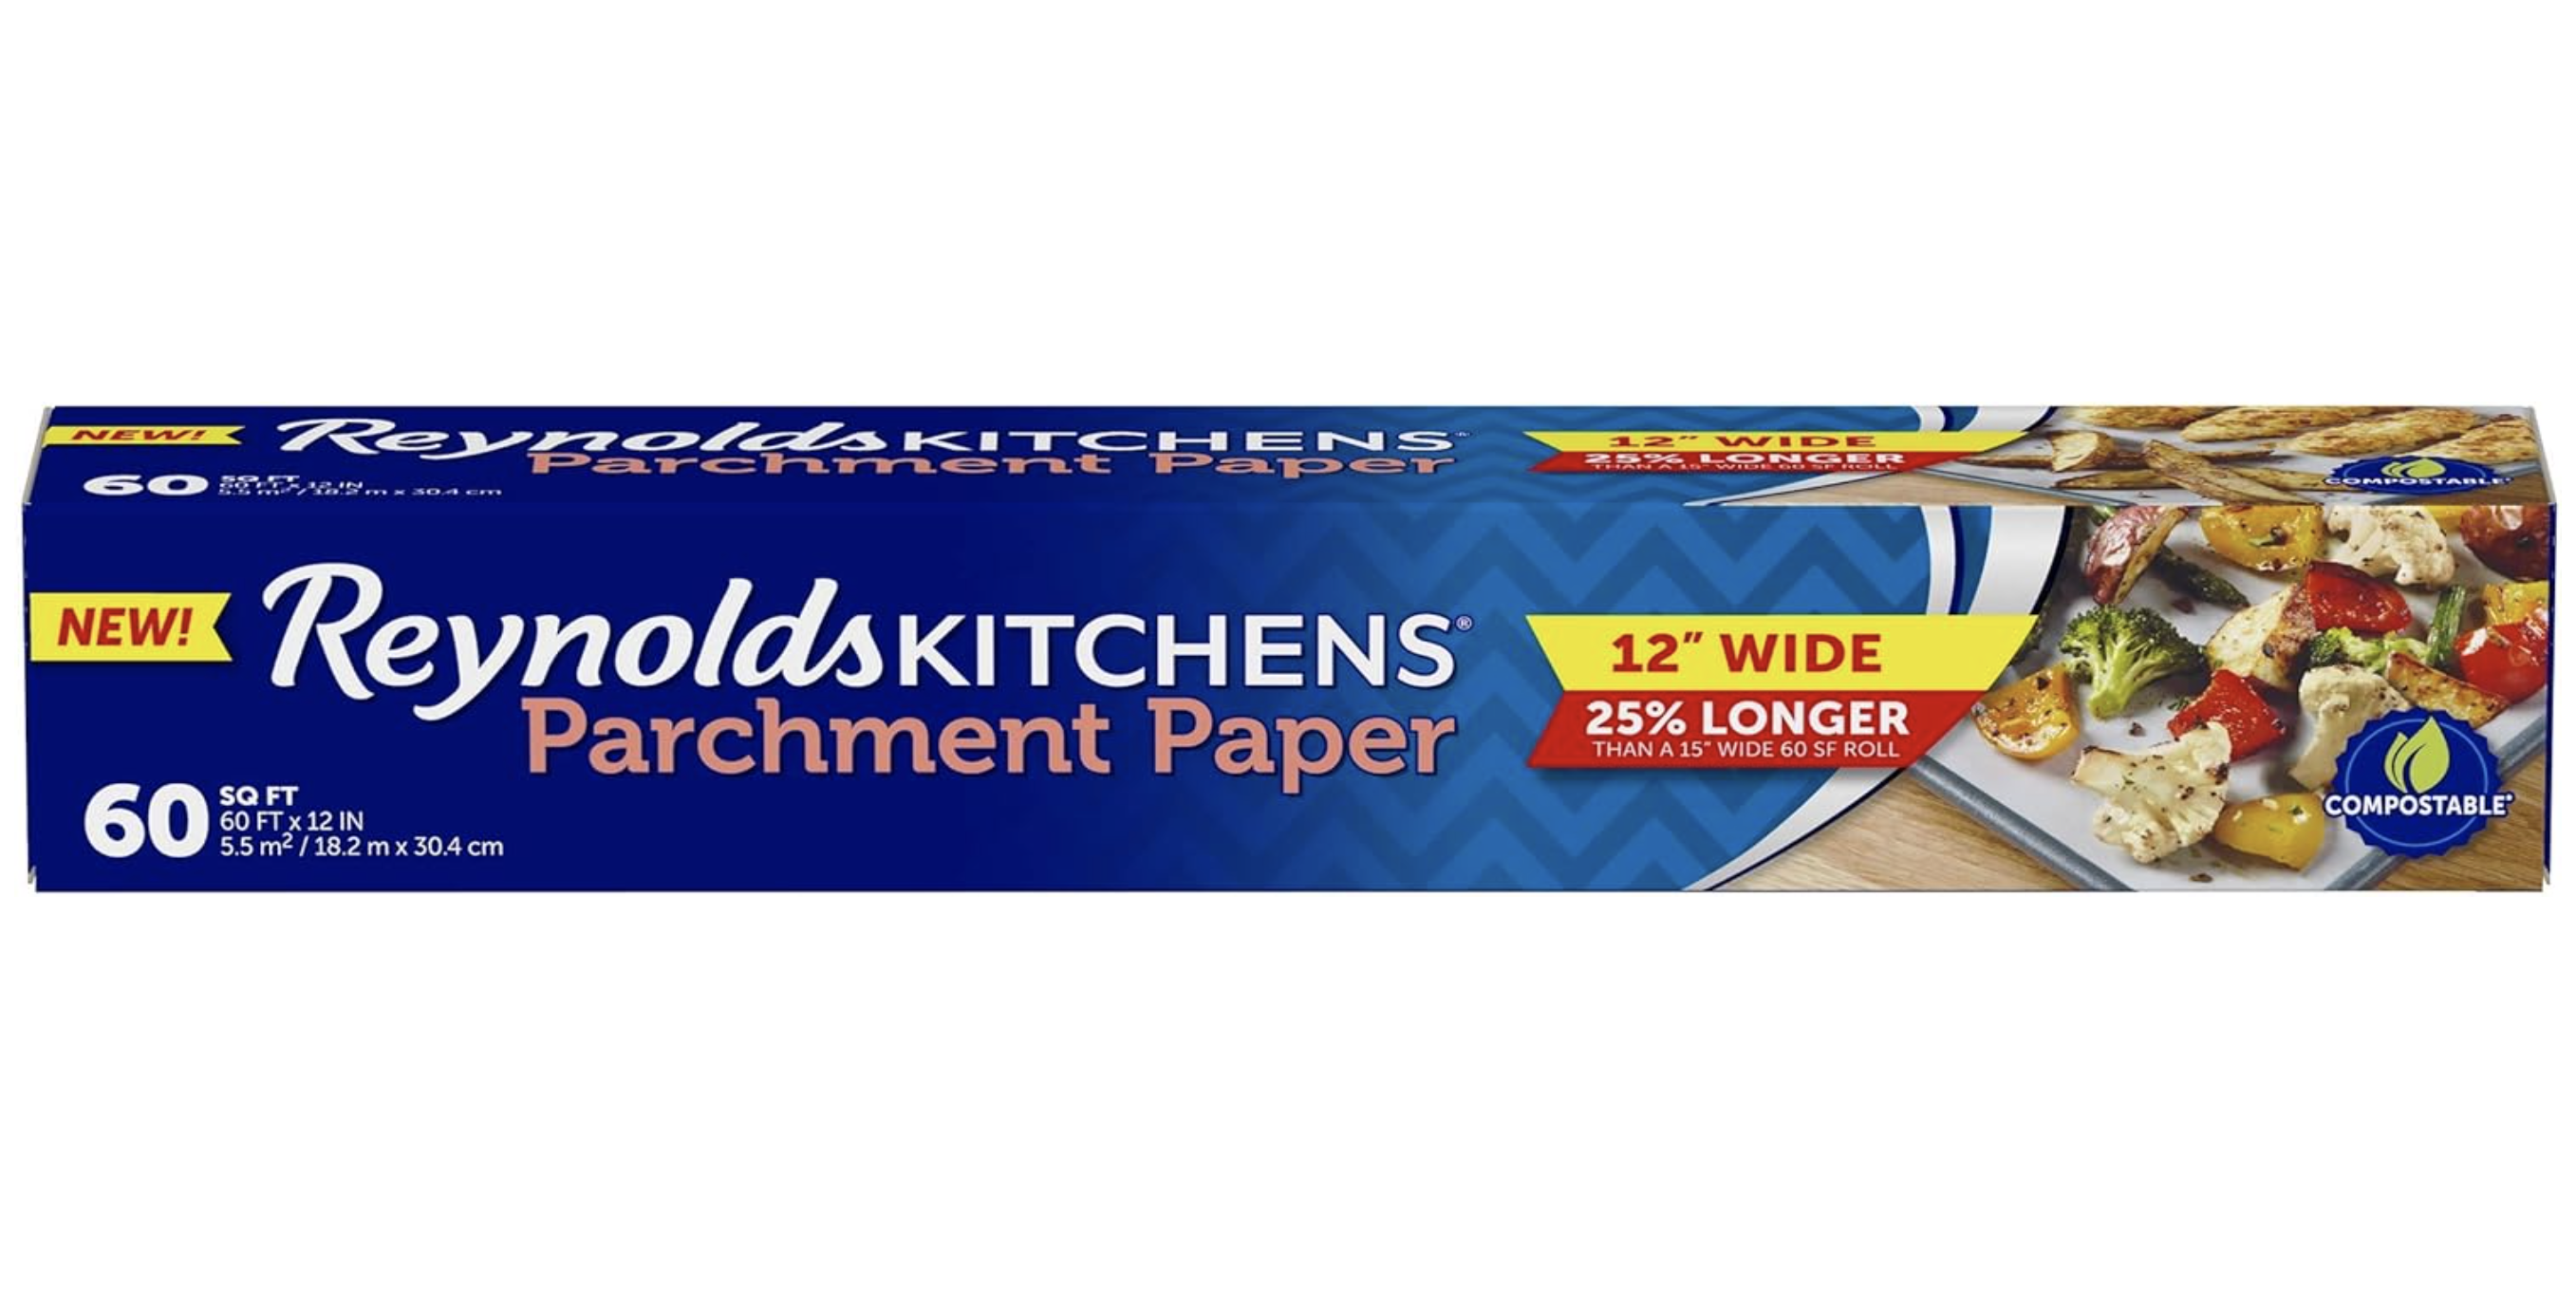  King Arthur, Pre-Cut Baking Parchment Paper, Heavy Duty,  Professional Grade, Nonstick, Reusable, Resealable Pack, Fits 18 X 13  Pan, 100 Count : Etchings Prints : Grocery & Gourmet Food